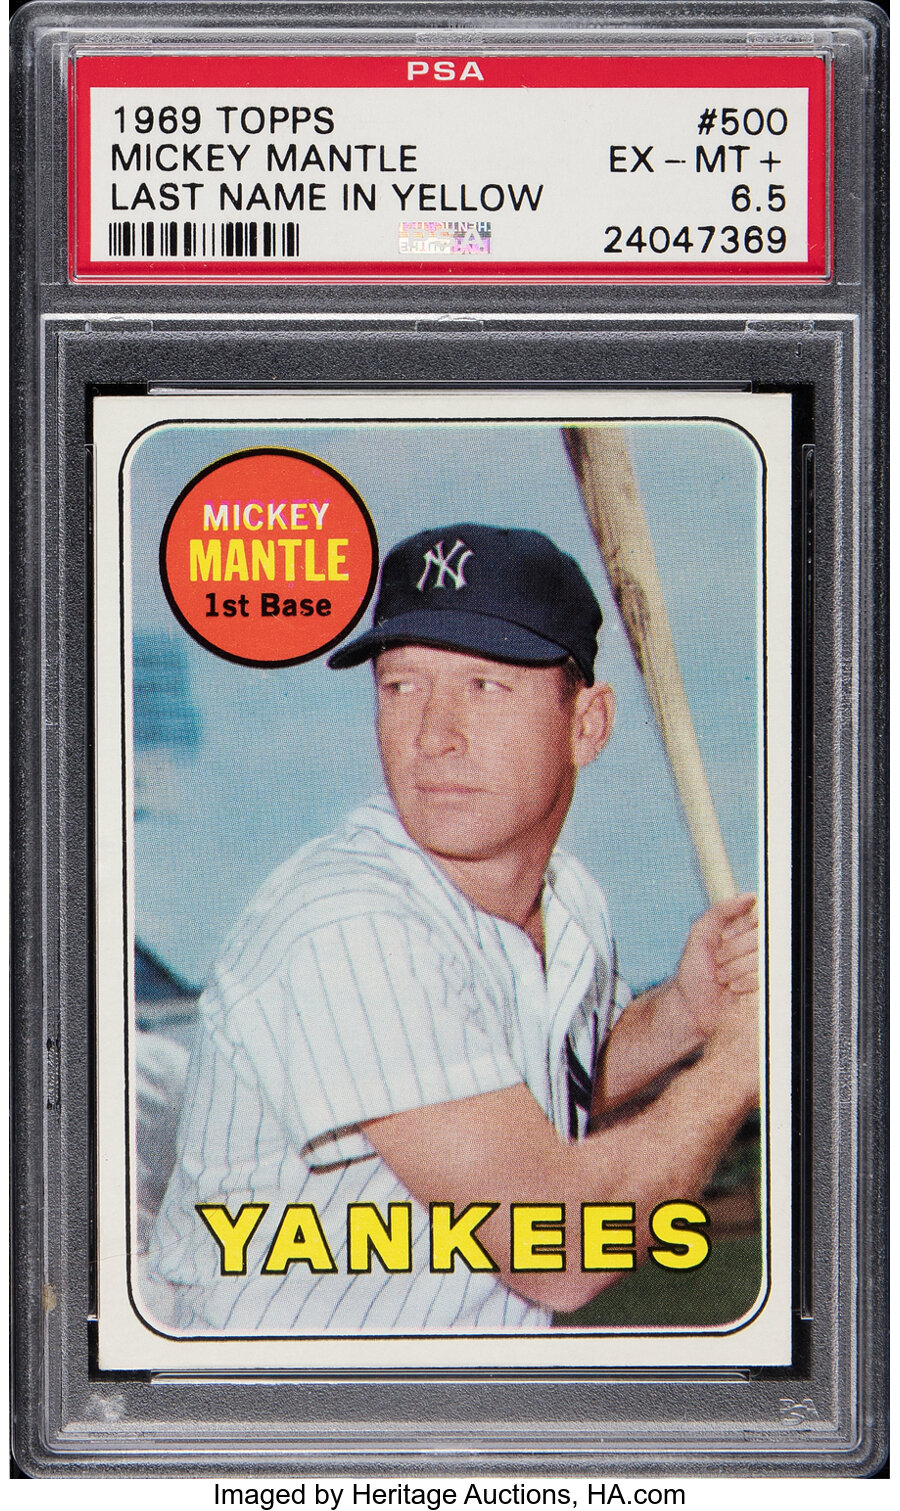 1969 Topps Mickey Mantle (Last Name In Yellow) #500 PSA EX-MT+ 6.5